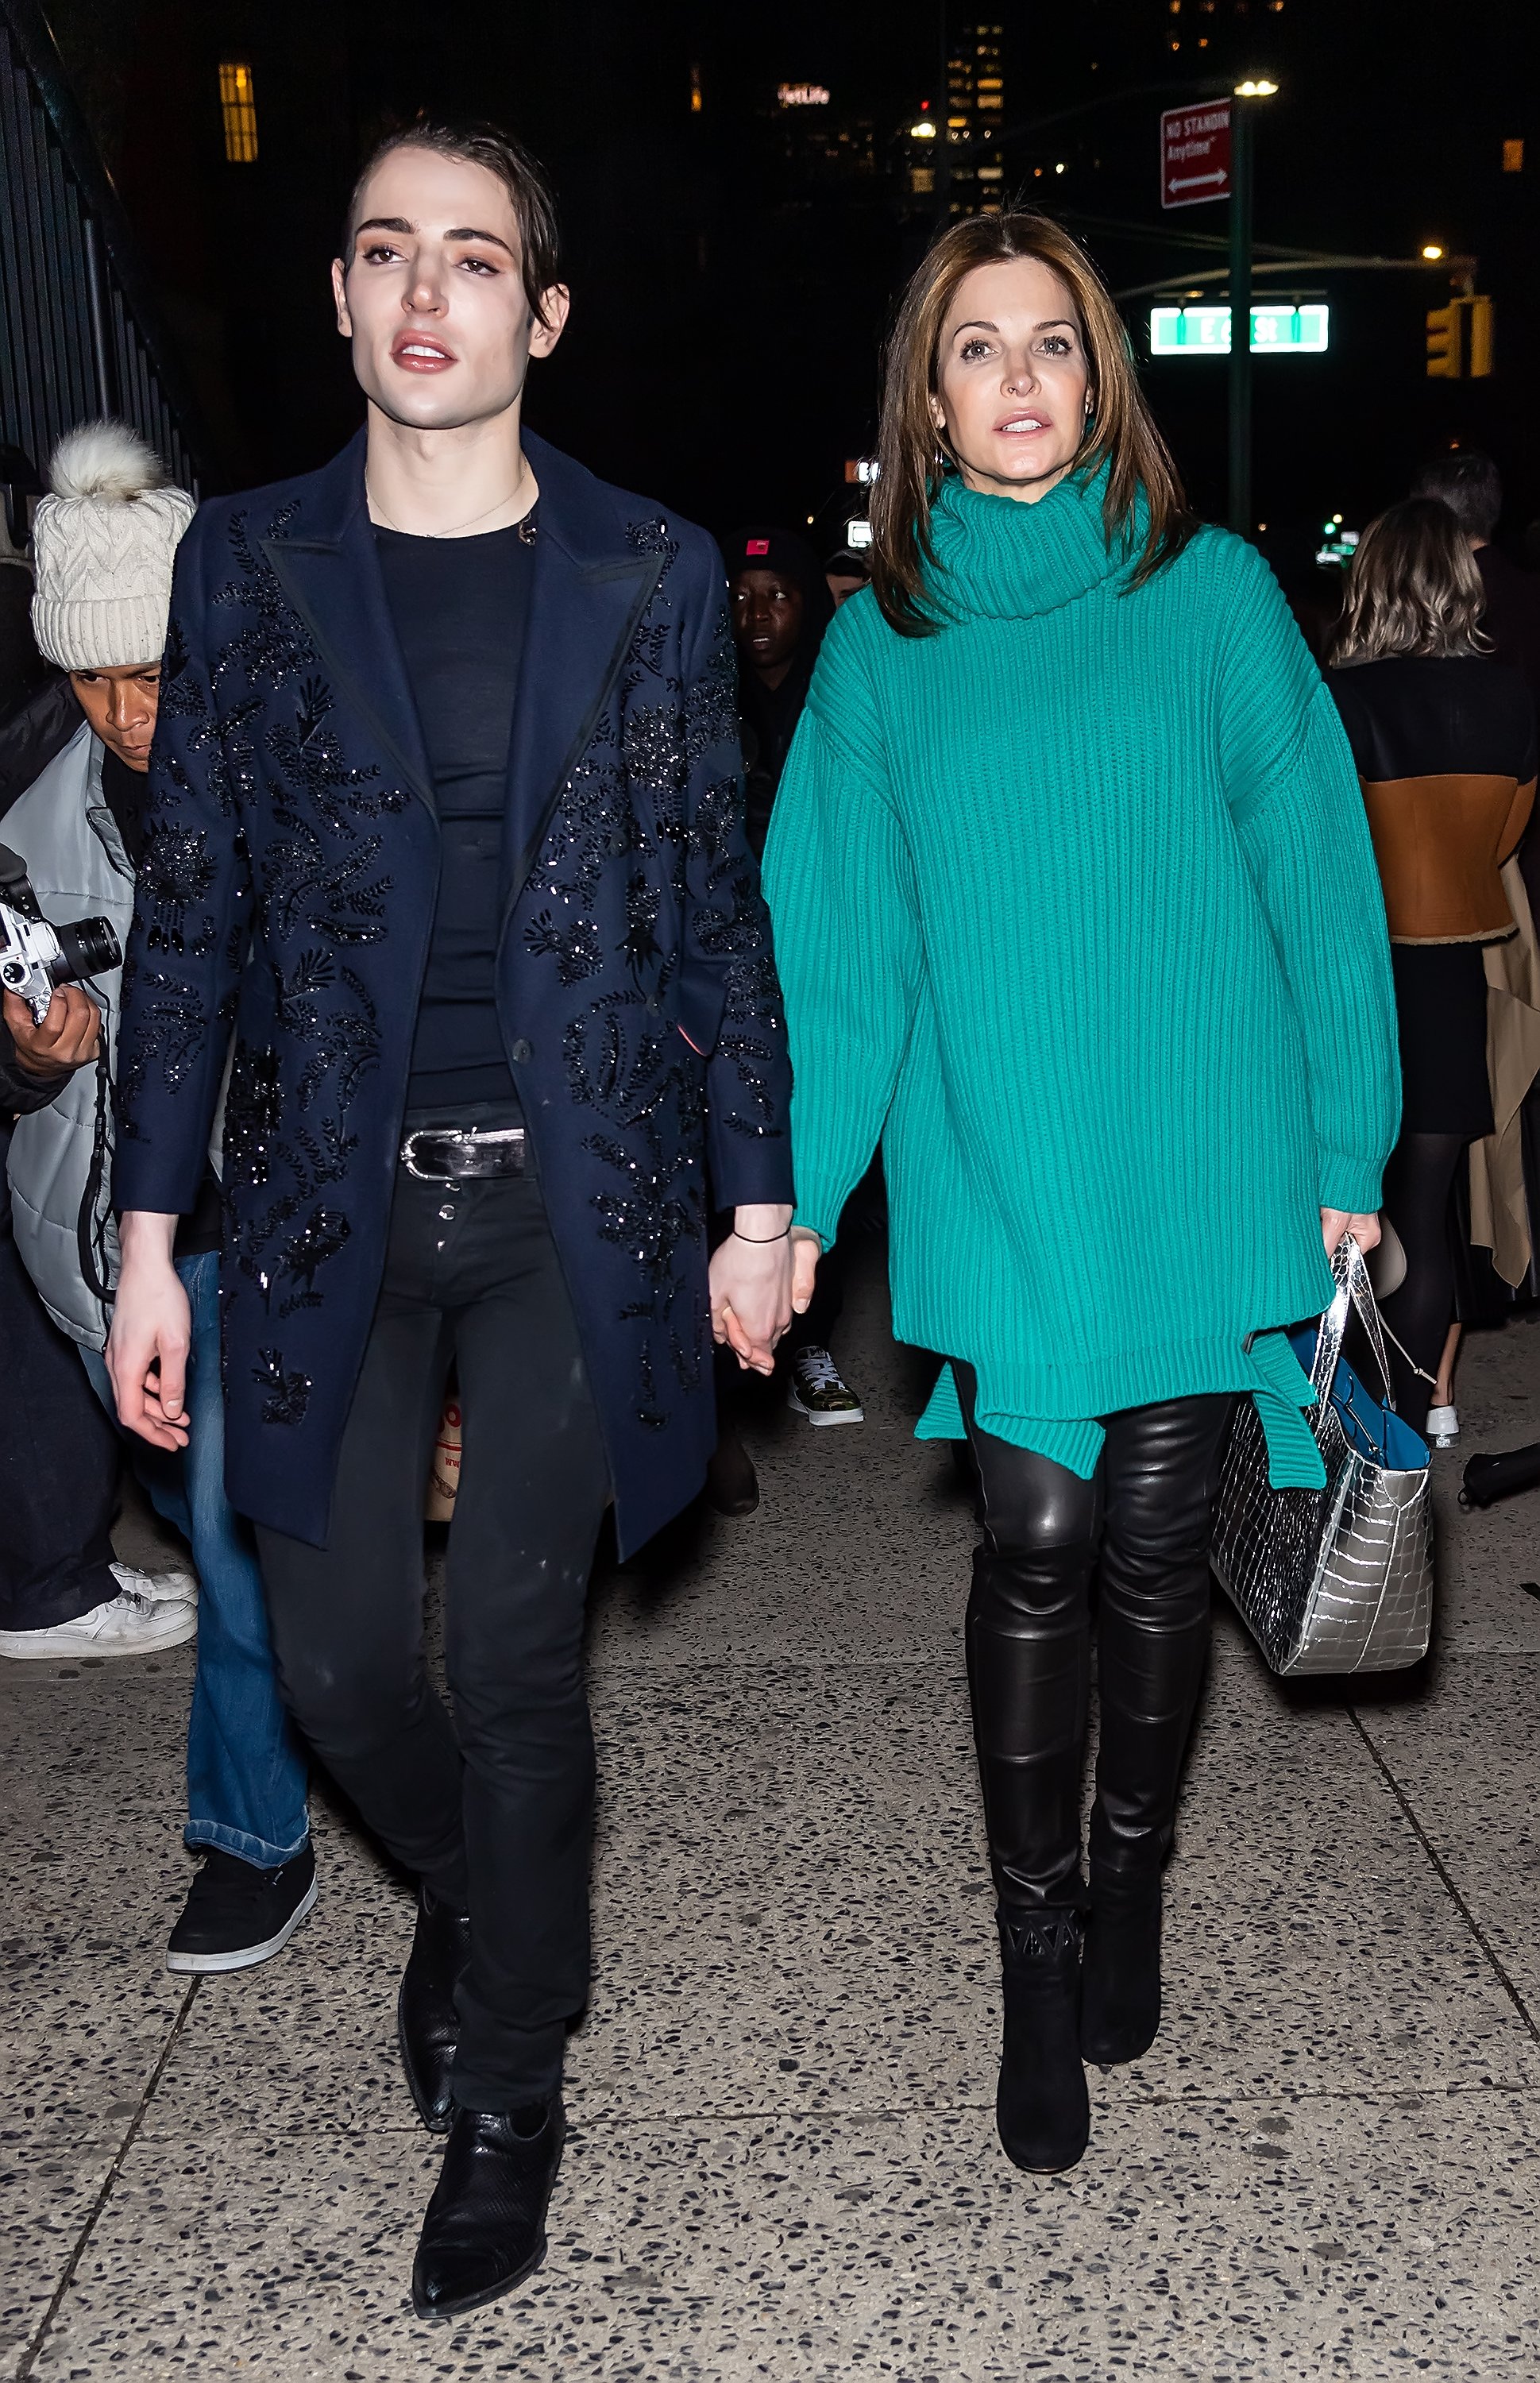 Stephanie Seymore and her son Harry Brant pictured leaving the Marc Jacobs Fall 2020 runway show, 2020, New York City. Photo: Getty Images.